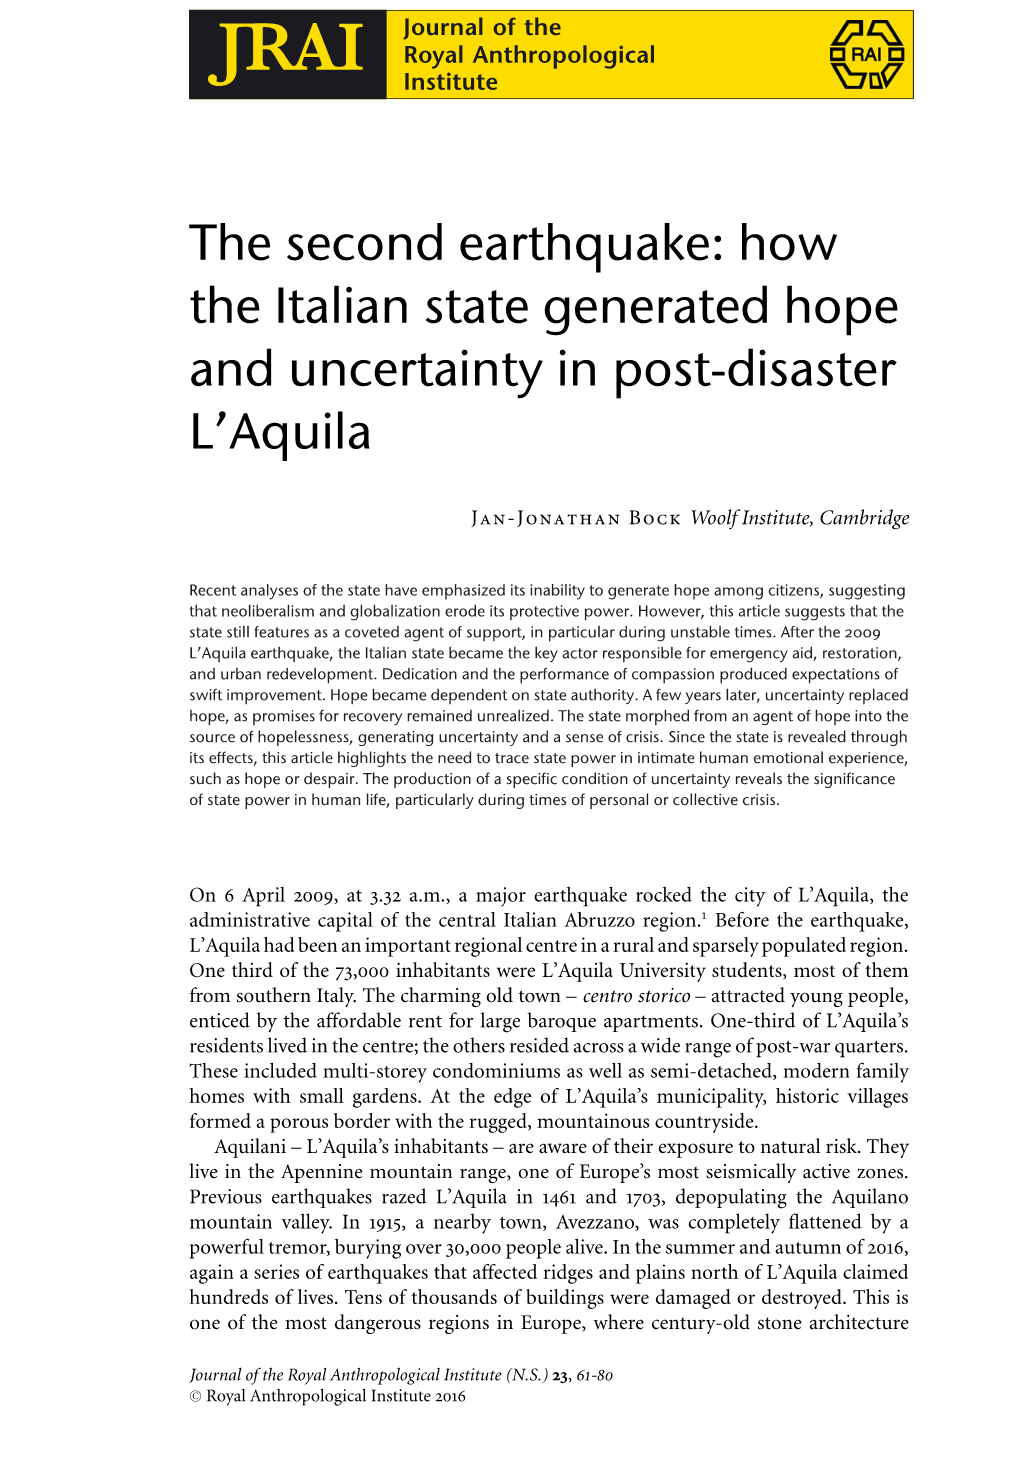 The Second Earthquake: How the Italian State Generated Hope and Uncertainty in Post-Disaster L’Aquila